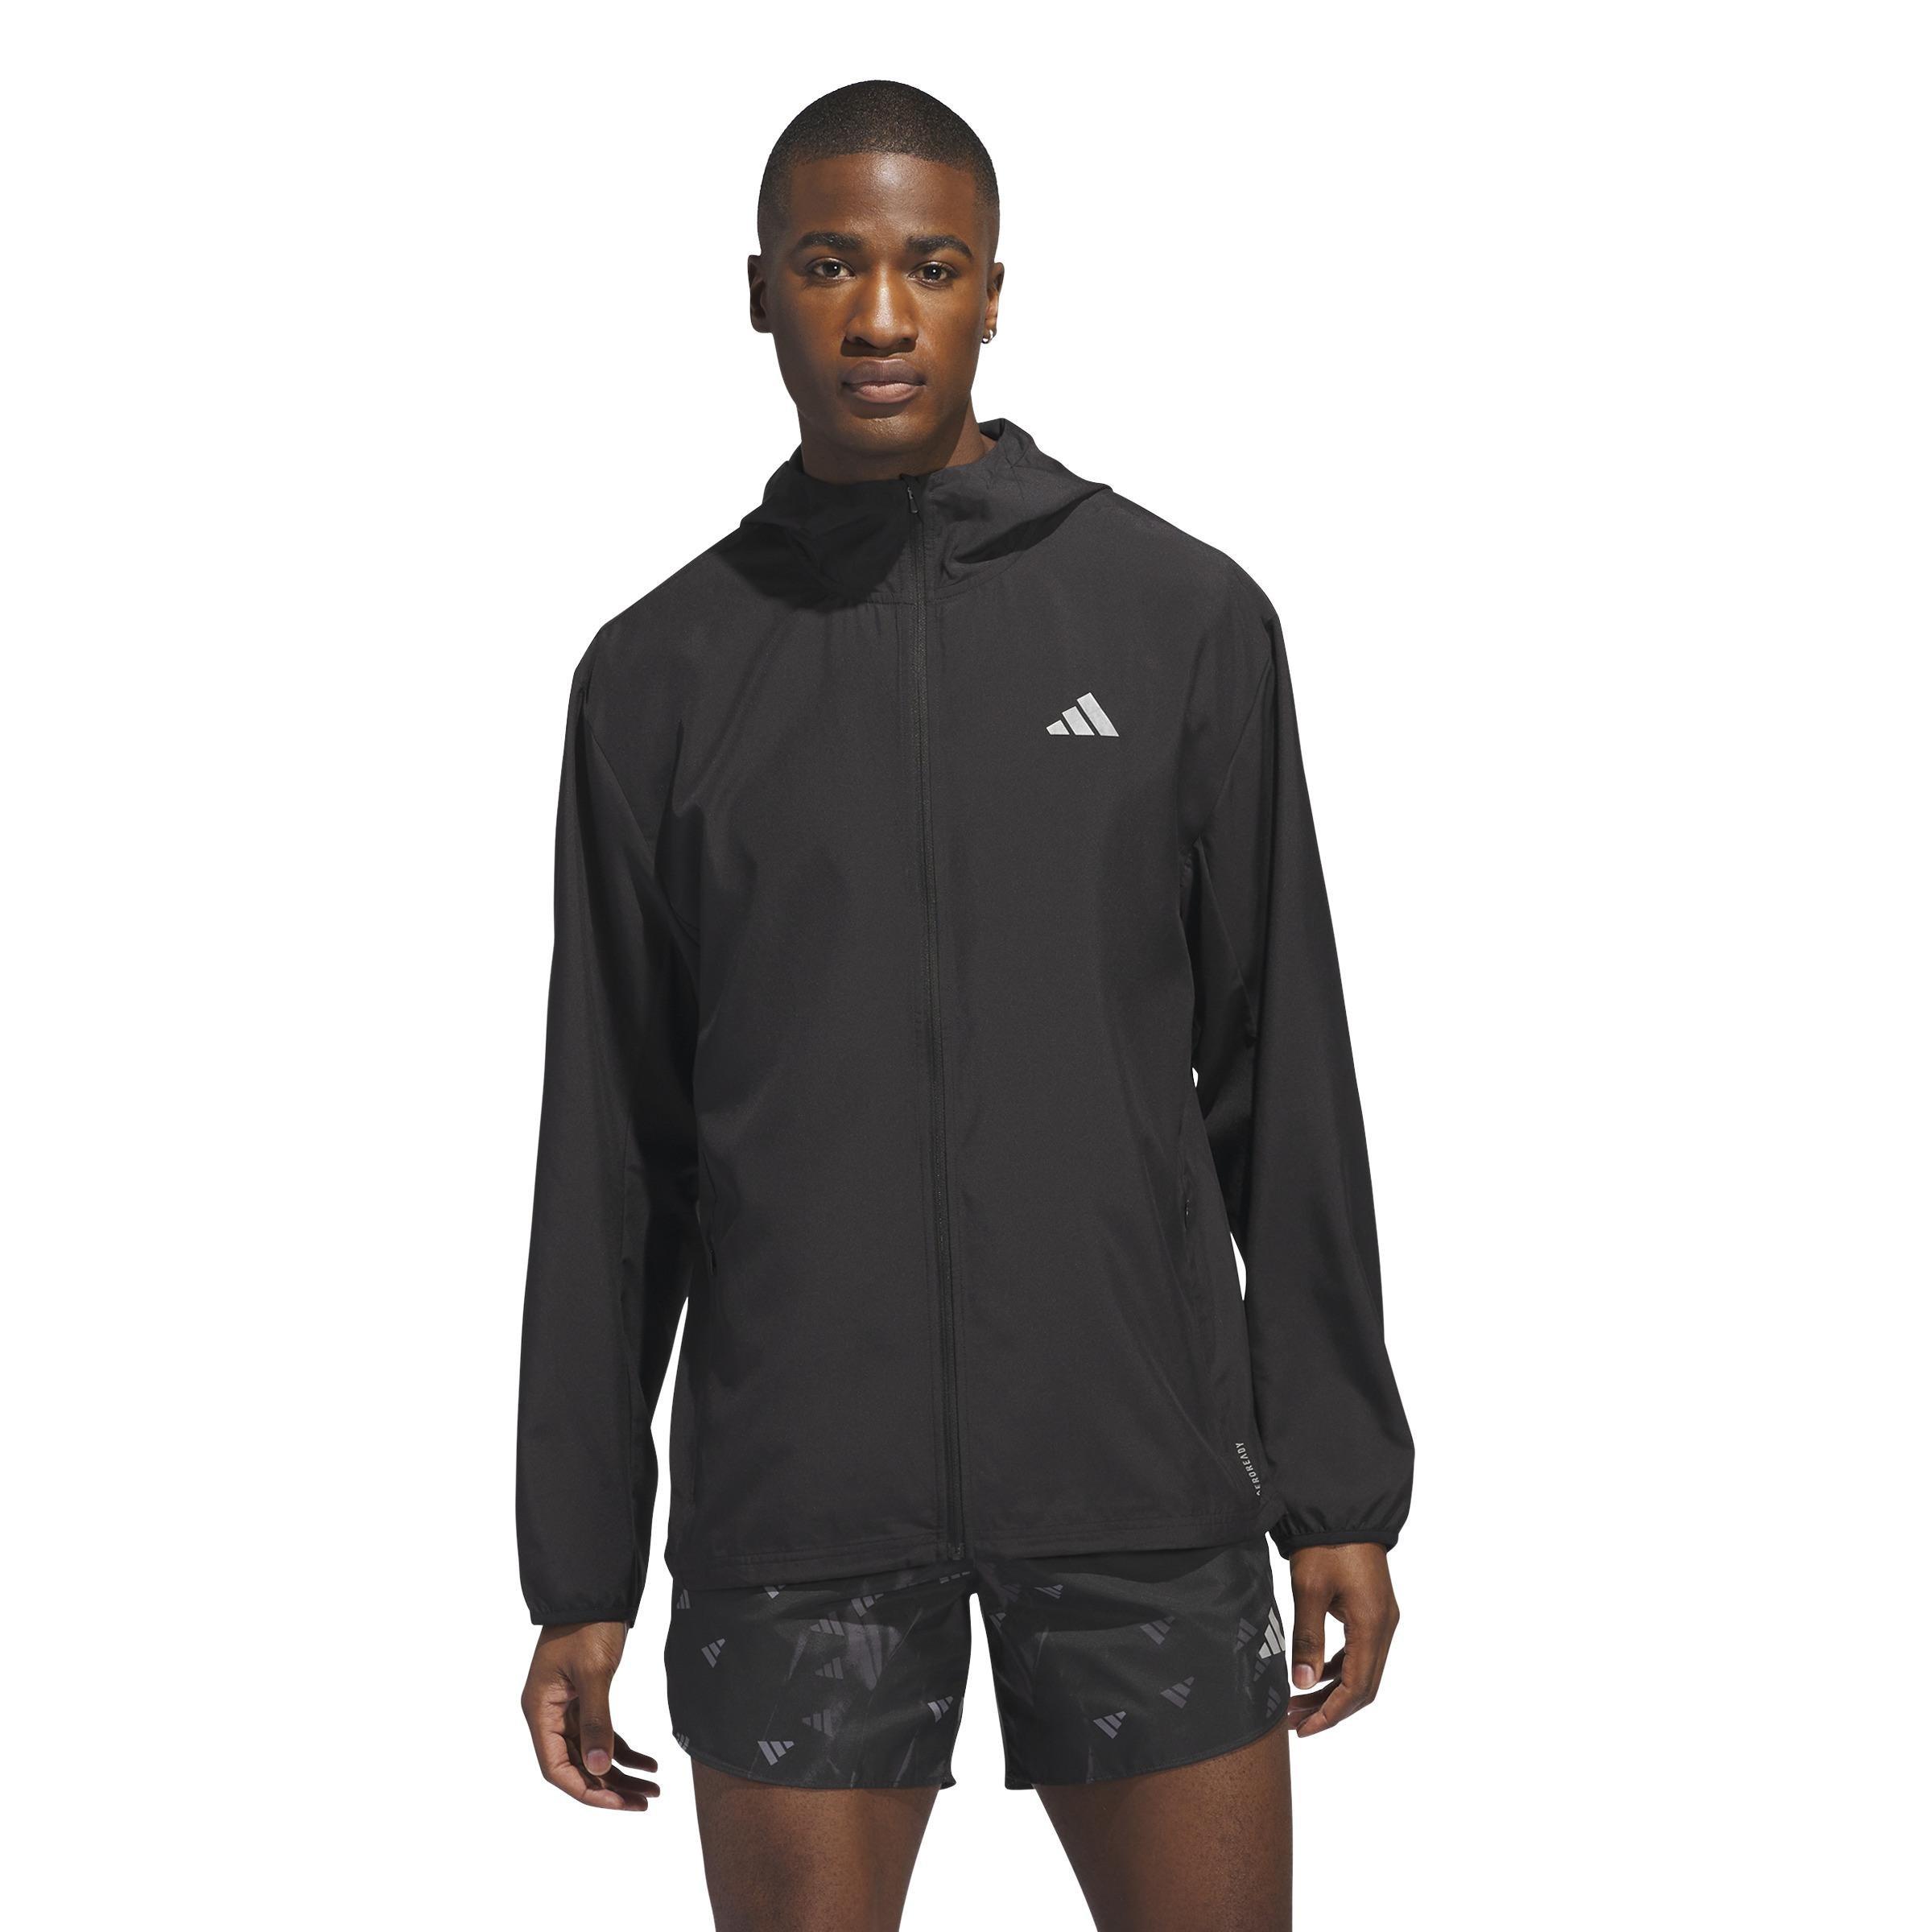 Run It Jacket BLACK Male Adult, A701_ONE, large image number 4